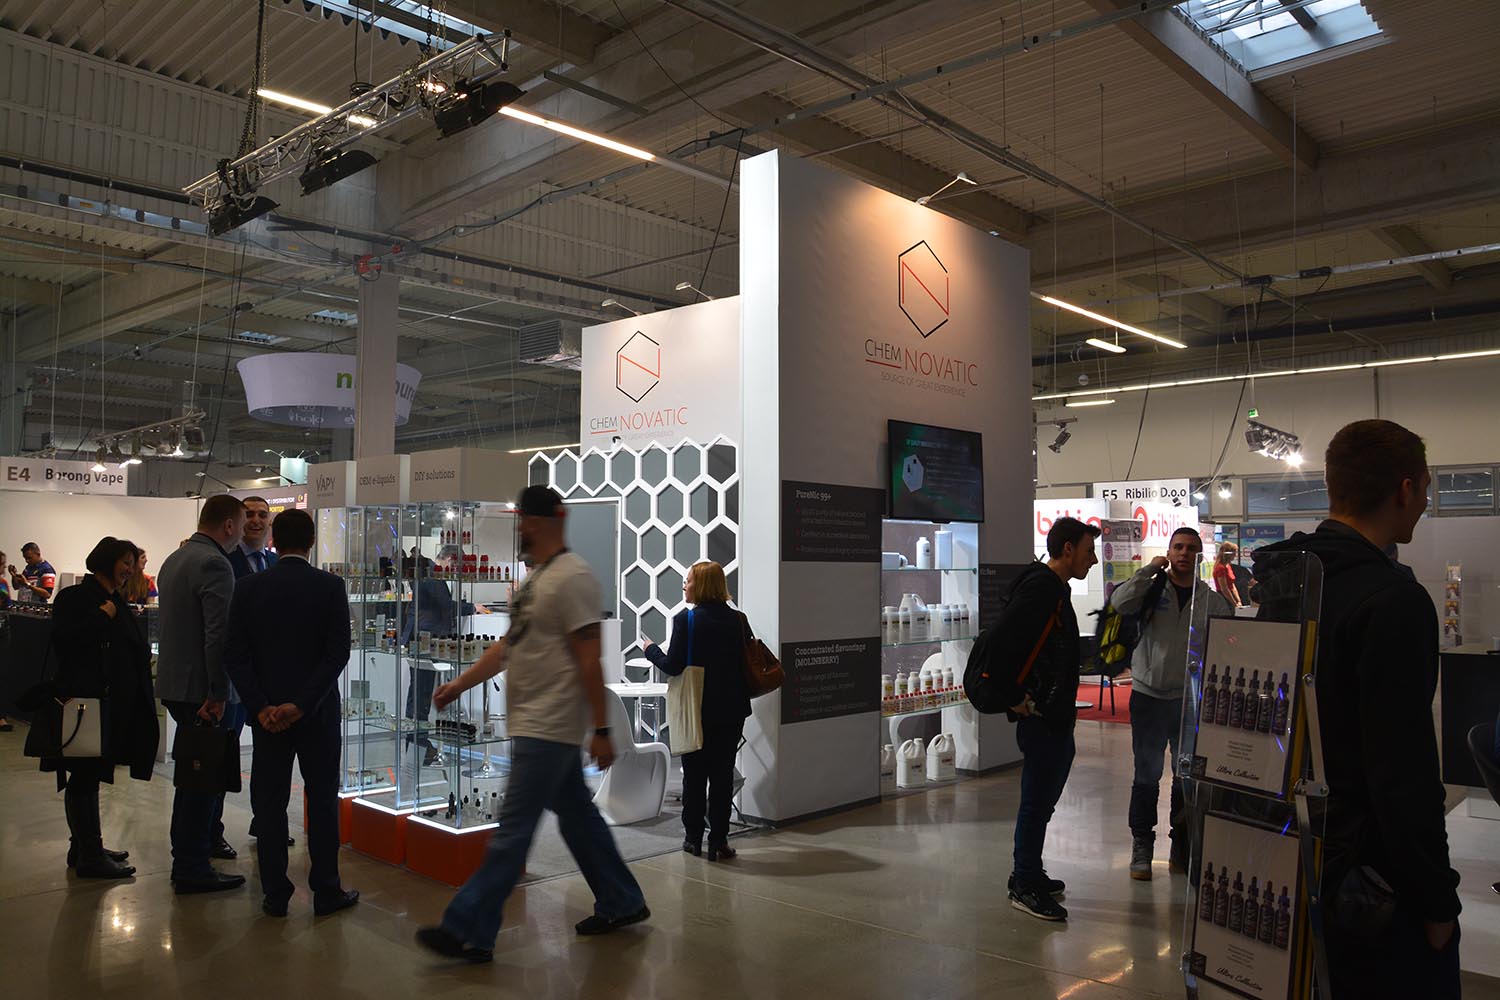 a photo of chenovatic stand and people around it during the expo